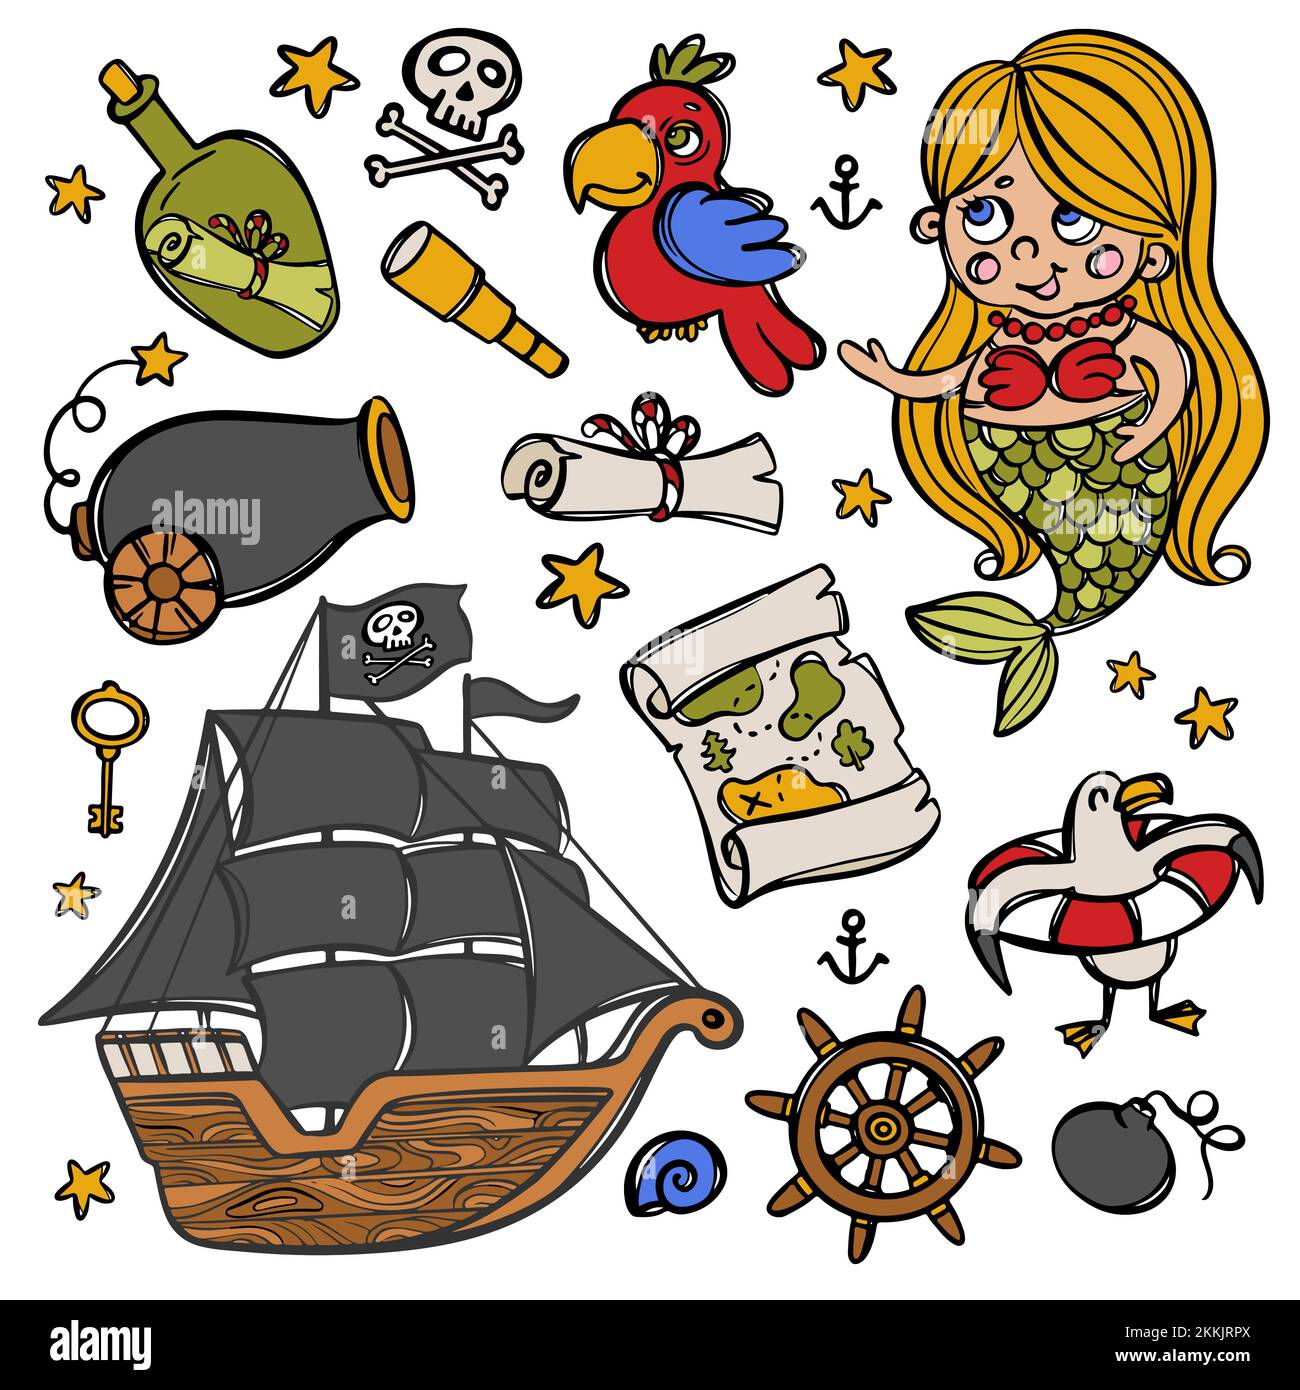 MERMAID AND PIRATE SHIP Sailboat With Black Sails And Other Sea Travel Attributes Hand Drawn Cartoon Objects Vector Illustration Set For Design And Pr Stock Vector